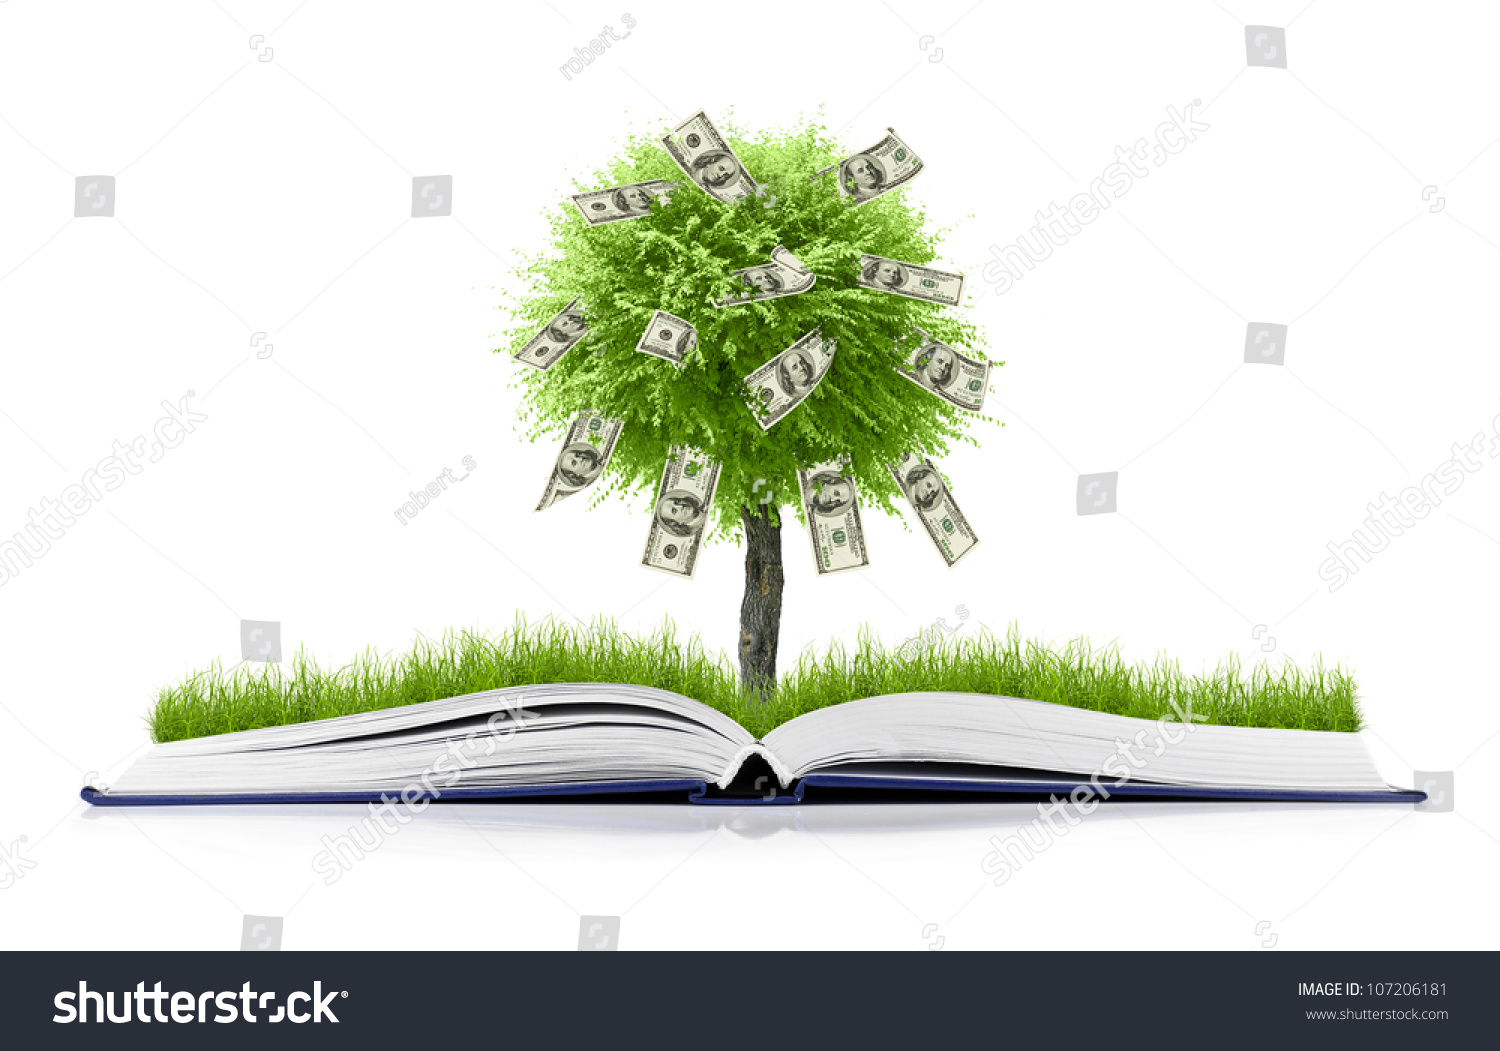 stock-photo-book-of-nature-with-grass-and-tree-growth-on-it-isolated-on-white-background-107206181.jpg